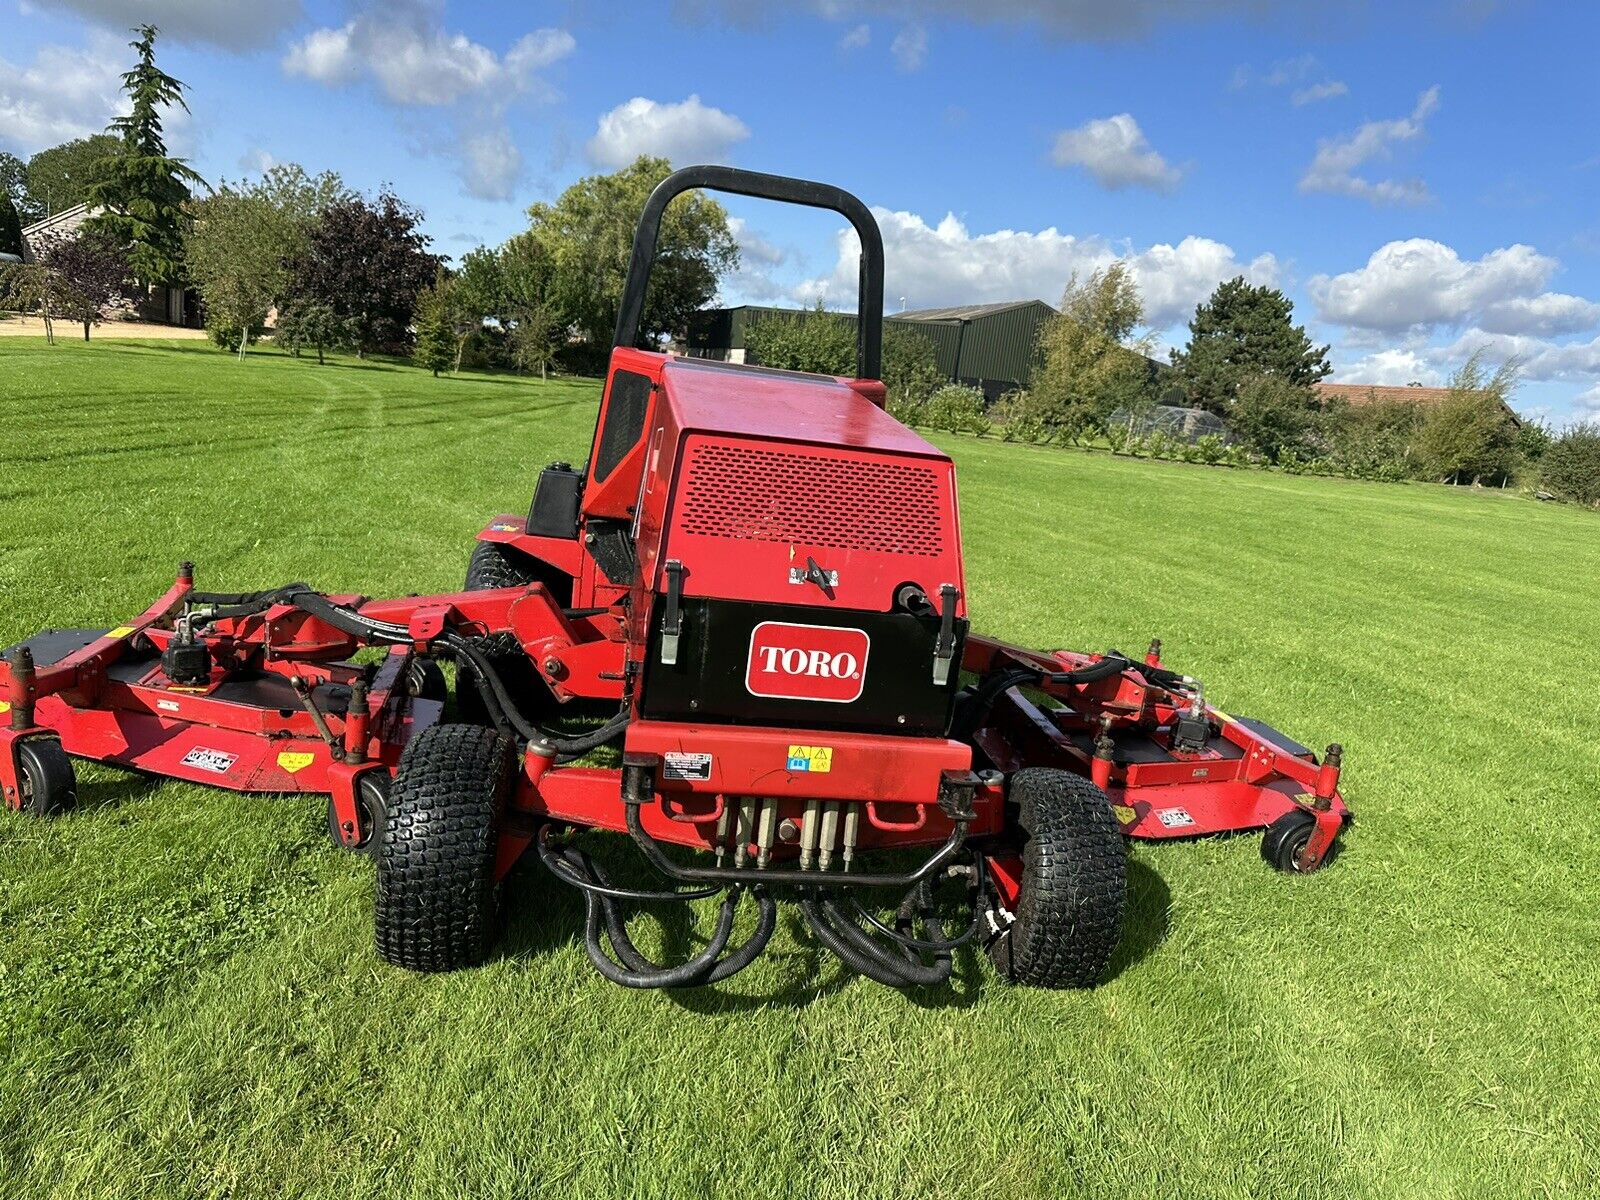 2006 TORO GROUNDSMASTER 580-D WIDE AREA BATWING RIDE SIT ON LAWN MOWER TRACTOR 3